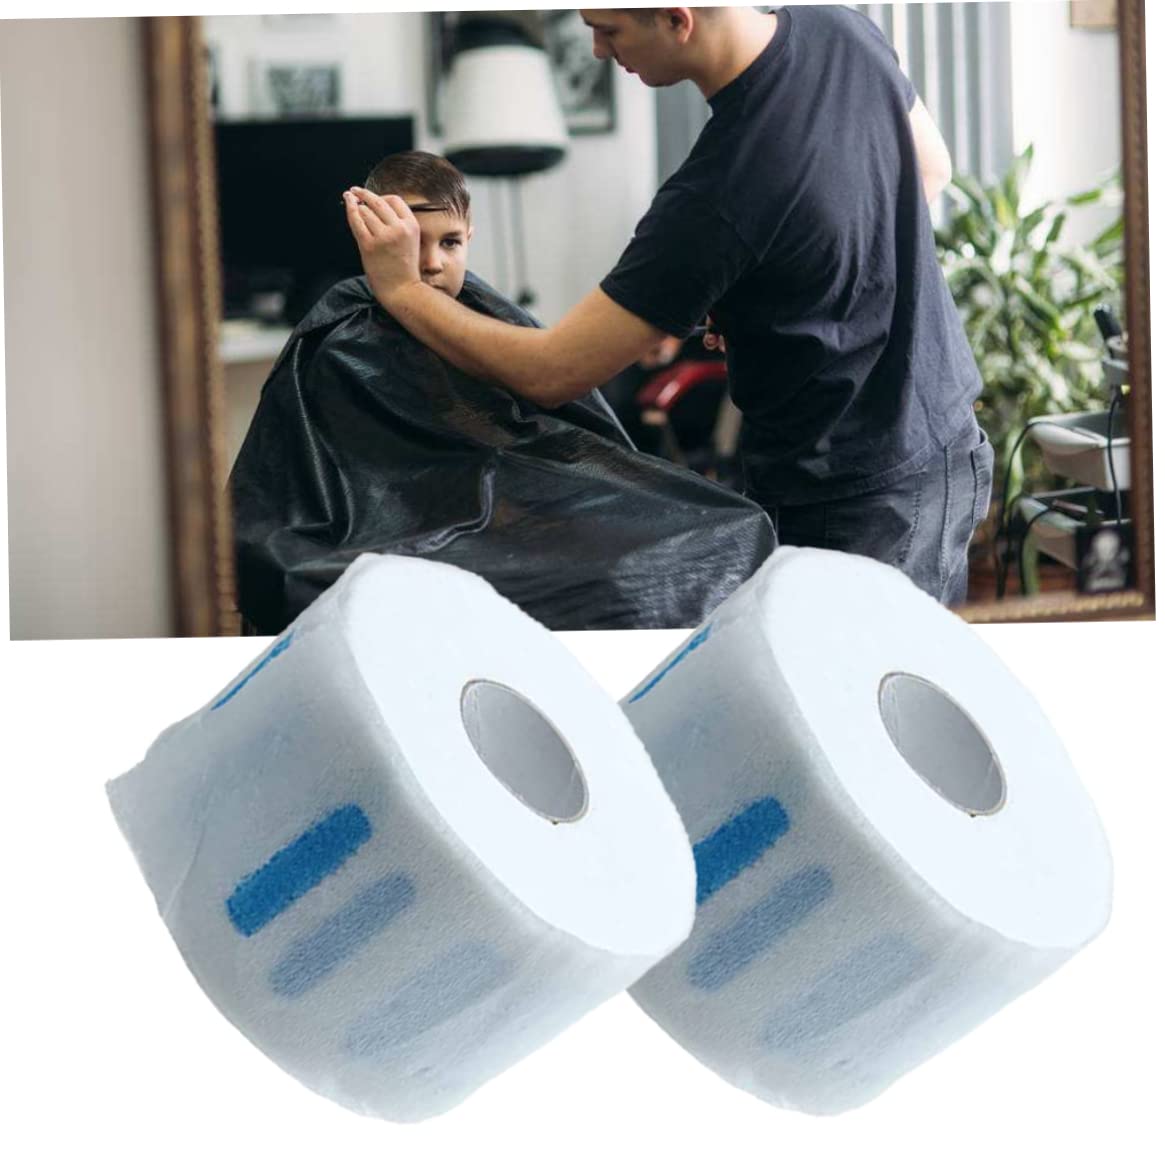 Disposable Neck Strips Haircutting Neck Strips Broken Hair Preventing Salon Barber Paper for Salon Haircut Styling